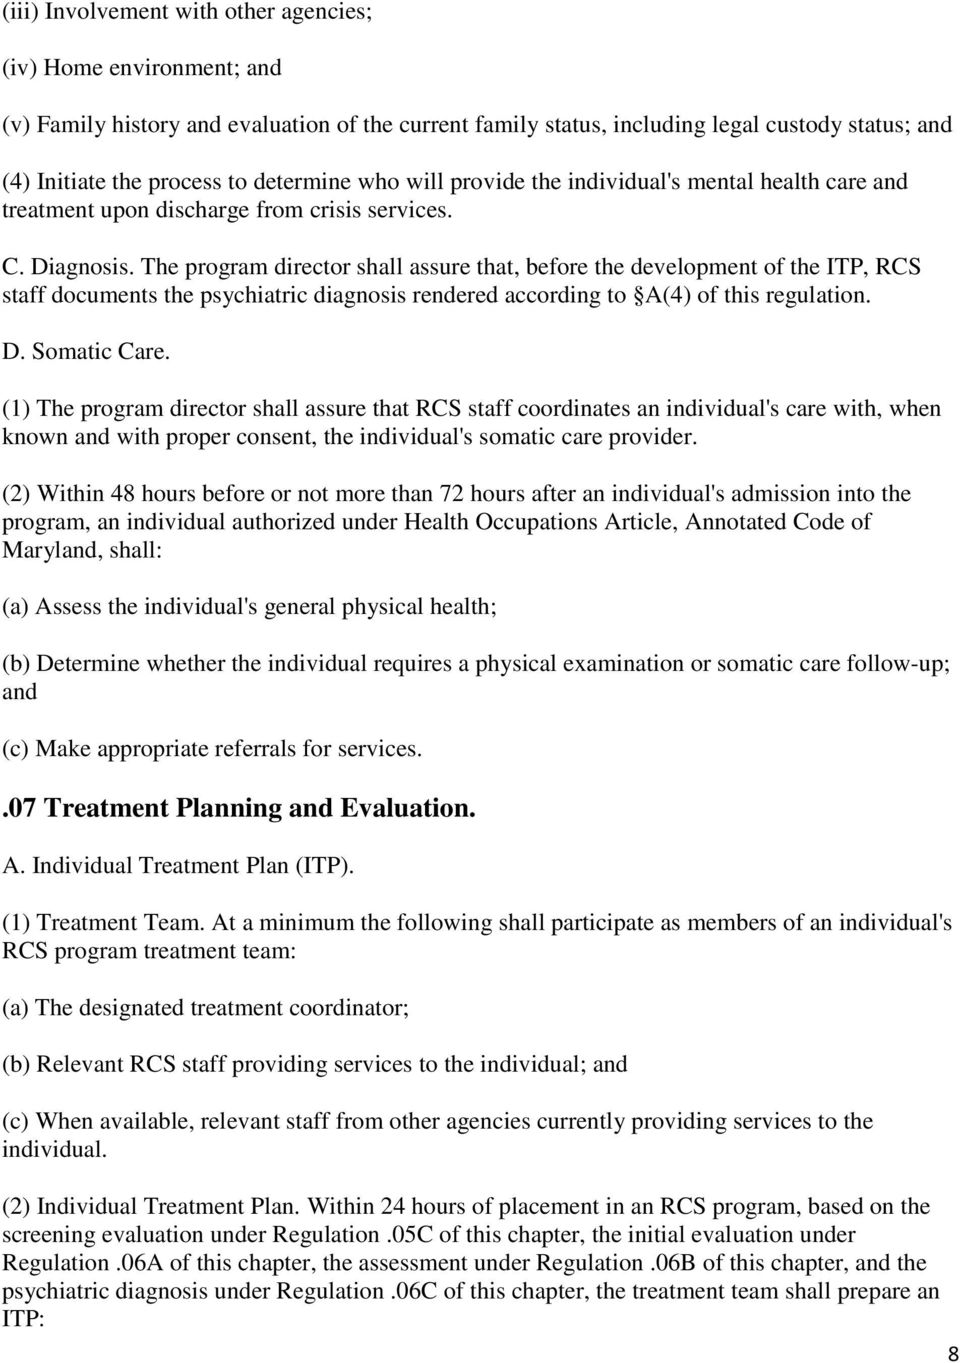 The program director shall assure that, before the development of the ITP, RCS staff documents the psychiatric diagnosis rendered according to A(4) of this regulation. D. Somatic Care.